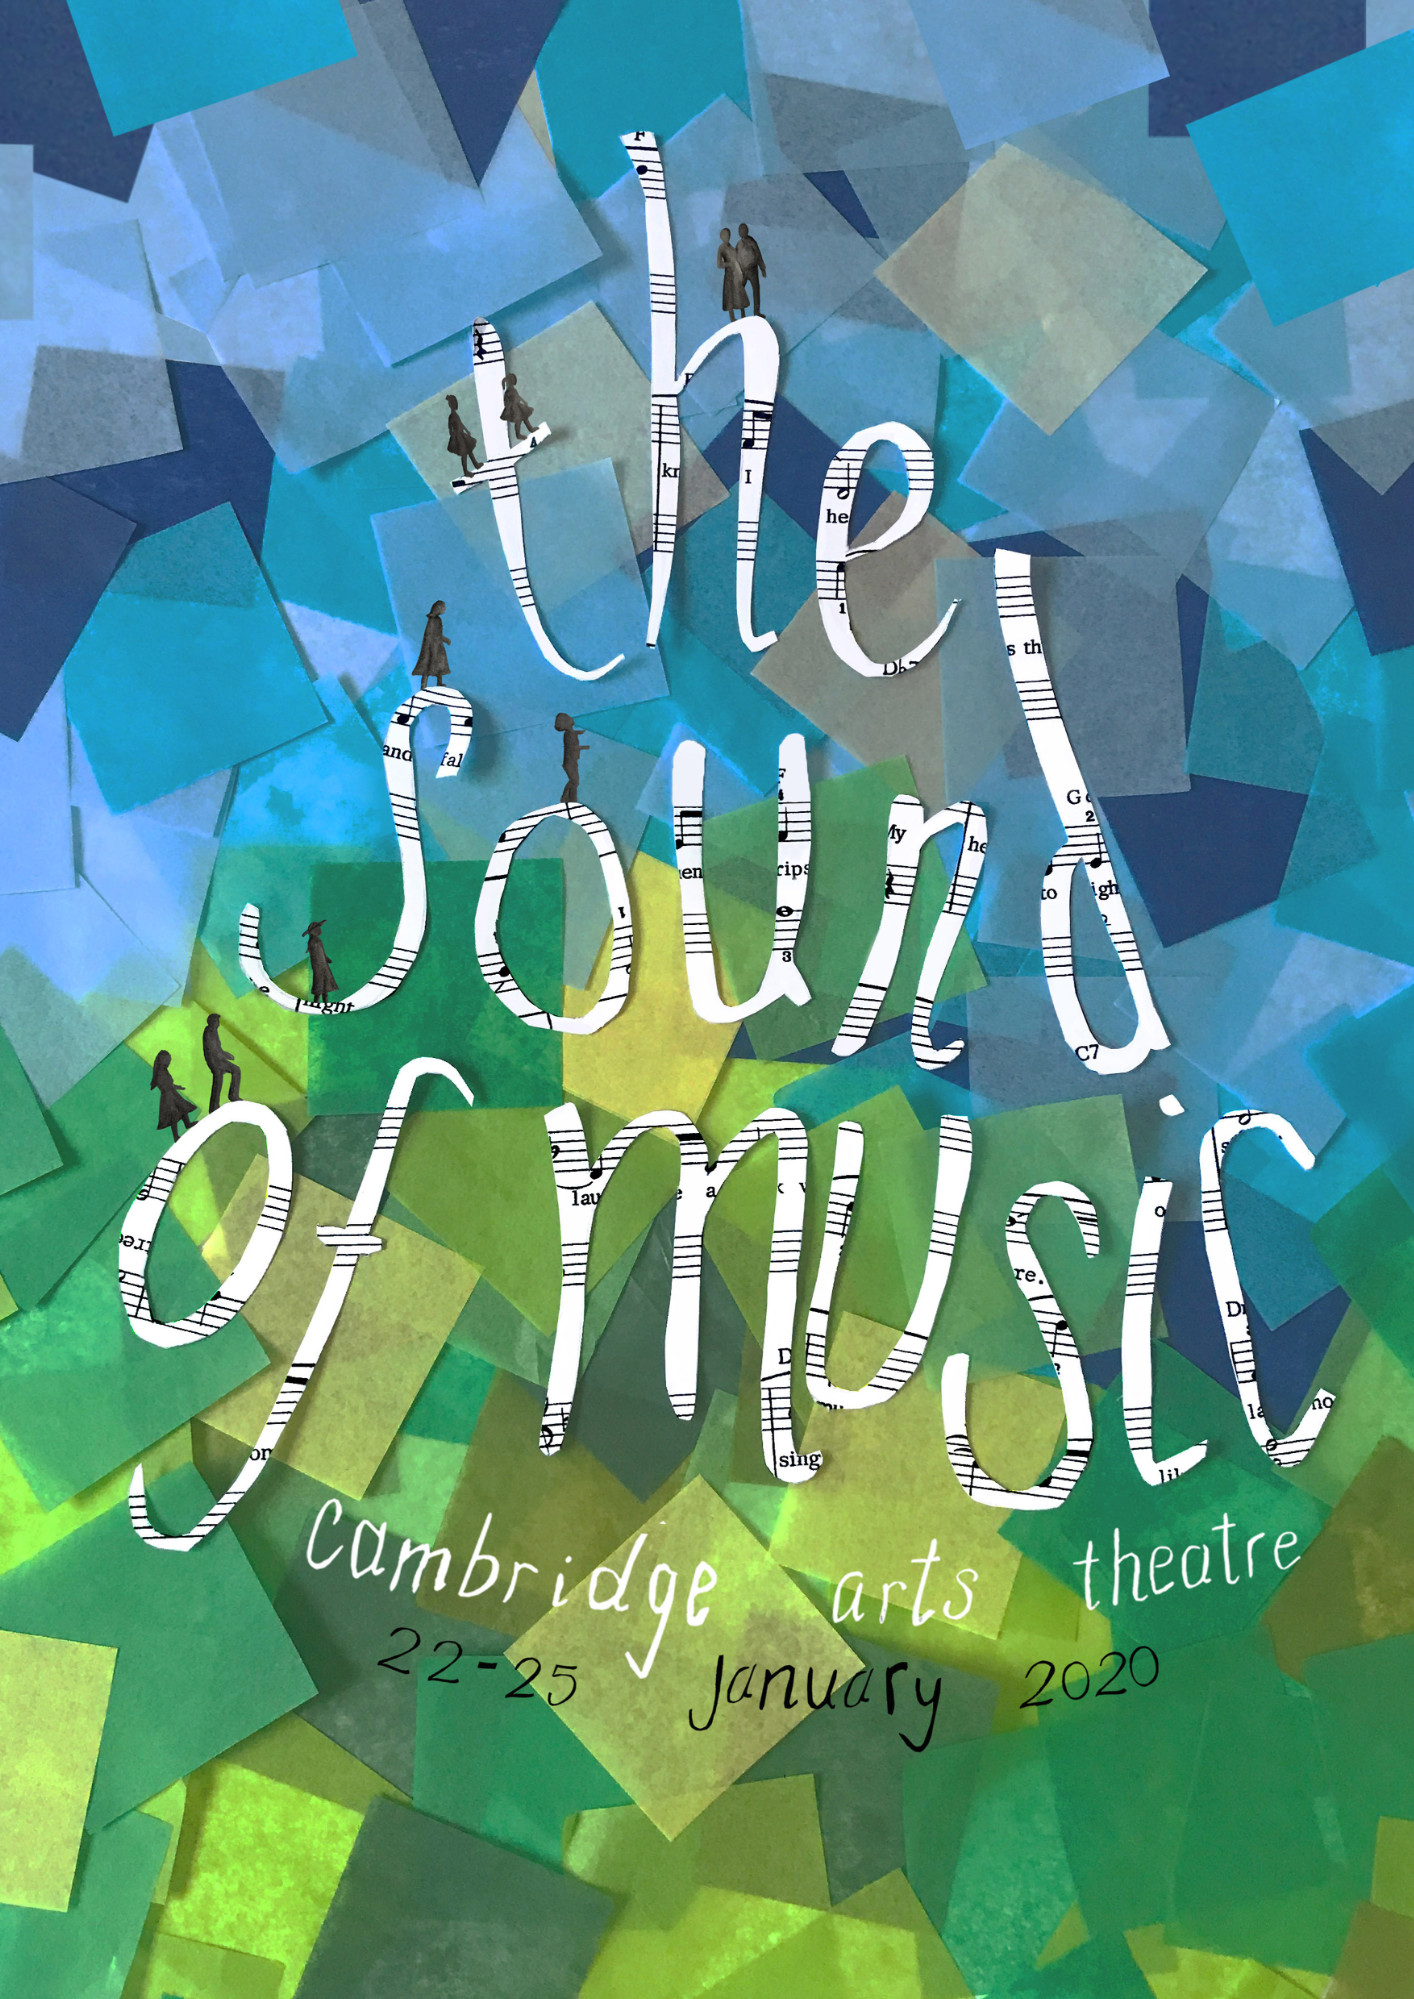 "The Sound of Music" Souvenir Poster. This poster celebrates the joyful energy that is present in the play. The theme of music and family is portrayed by the paper cut letters (sheet music) and the small illustrations of the von Trapp family climbing up the type. The vibrant colour scheme in the background resonates with the beautiful scenery of the Alps. Lauren Maxwell.